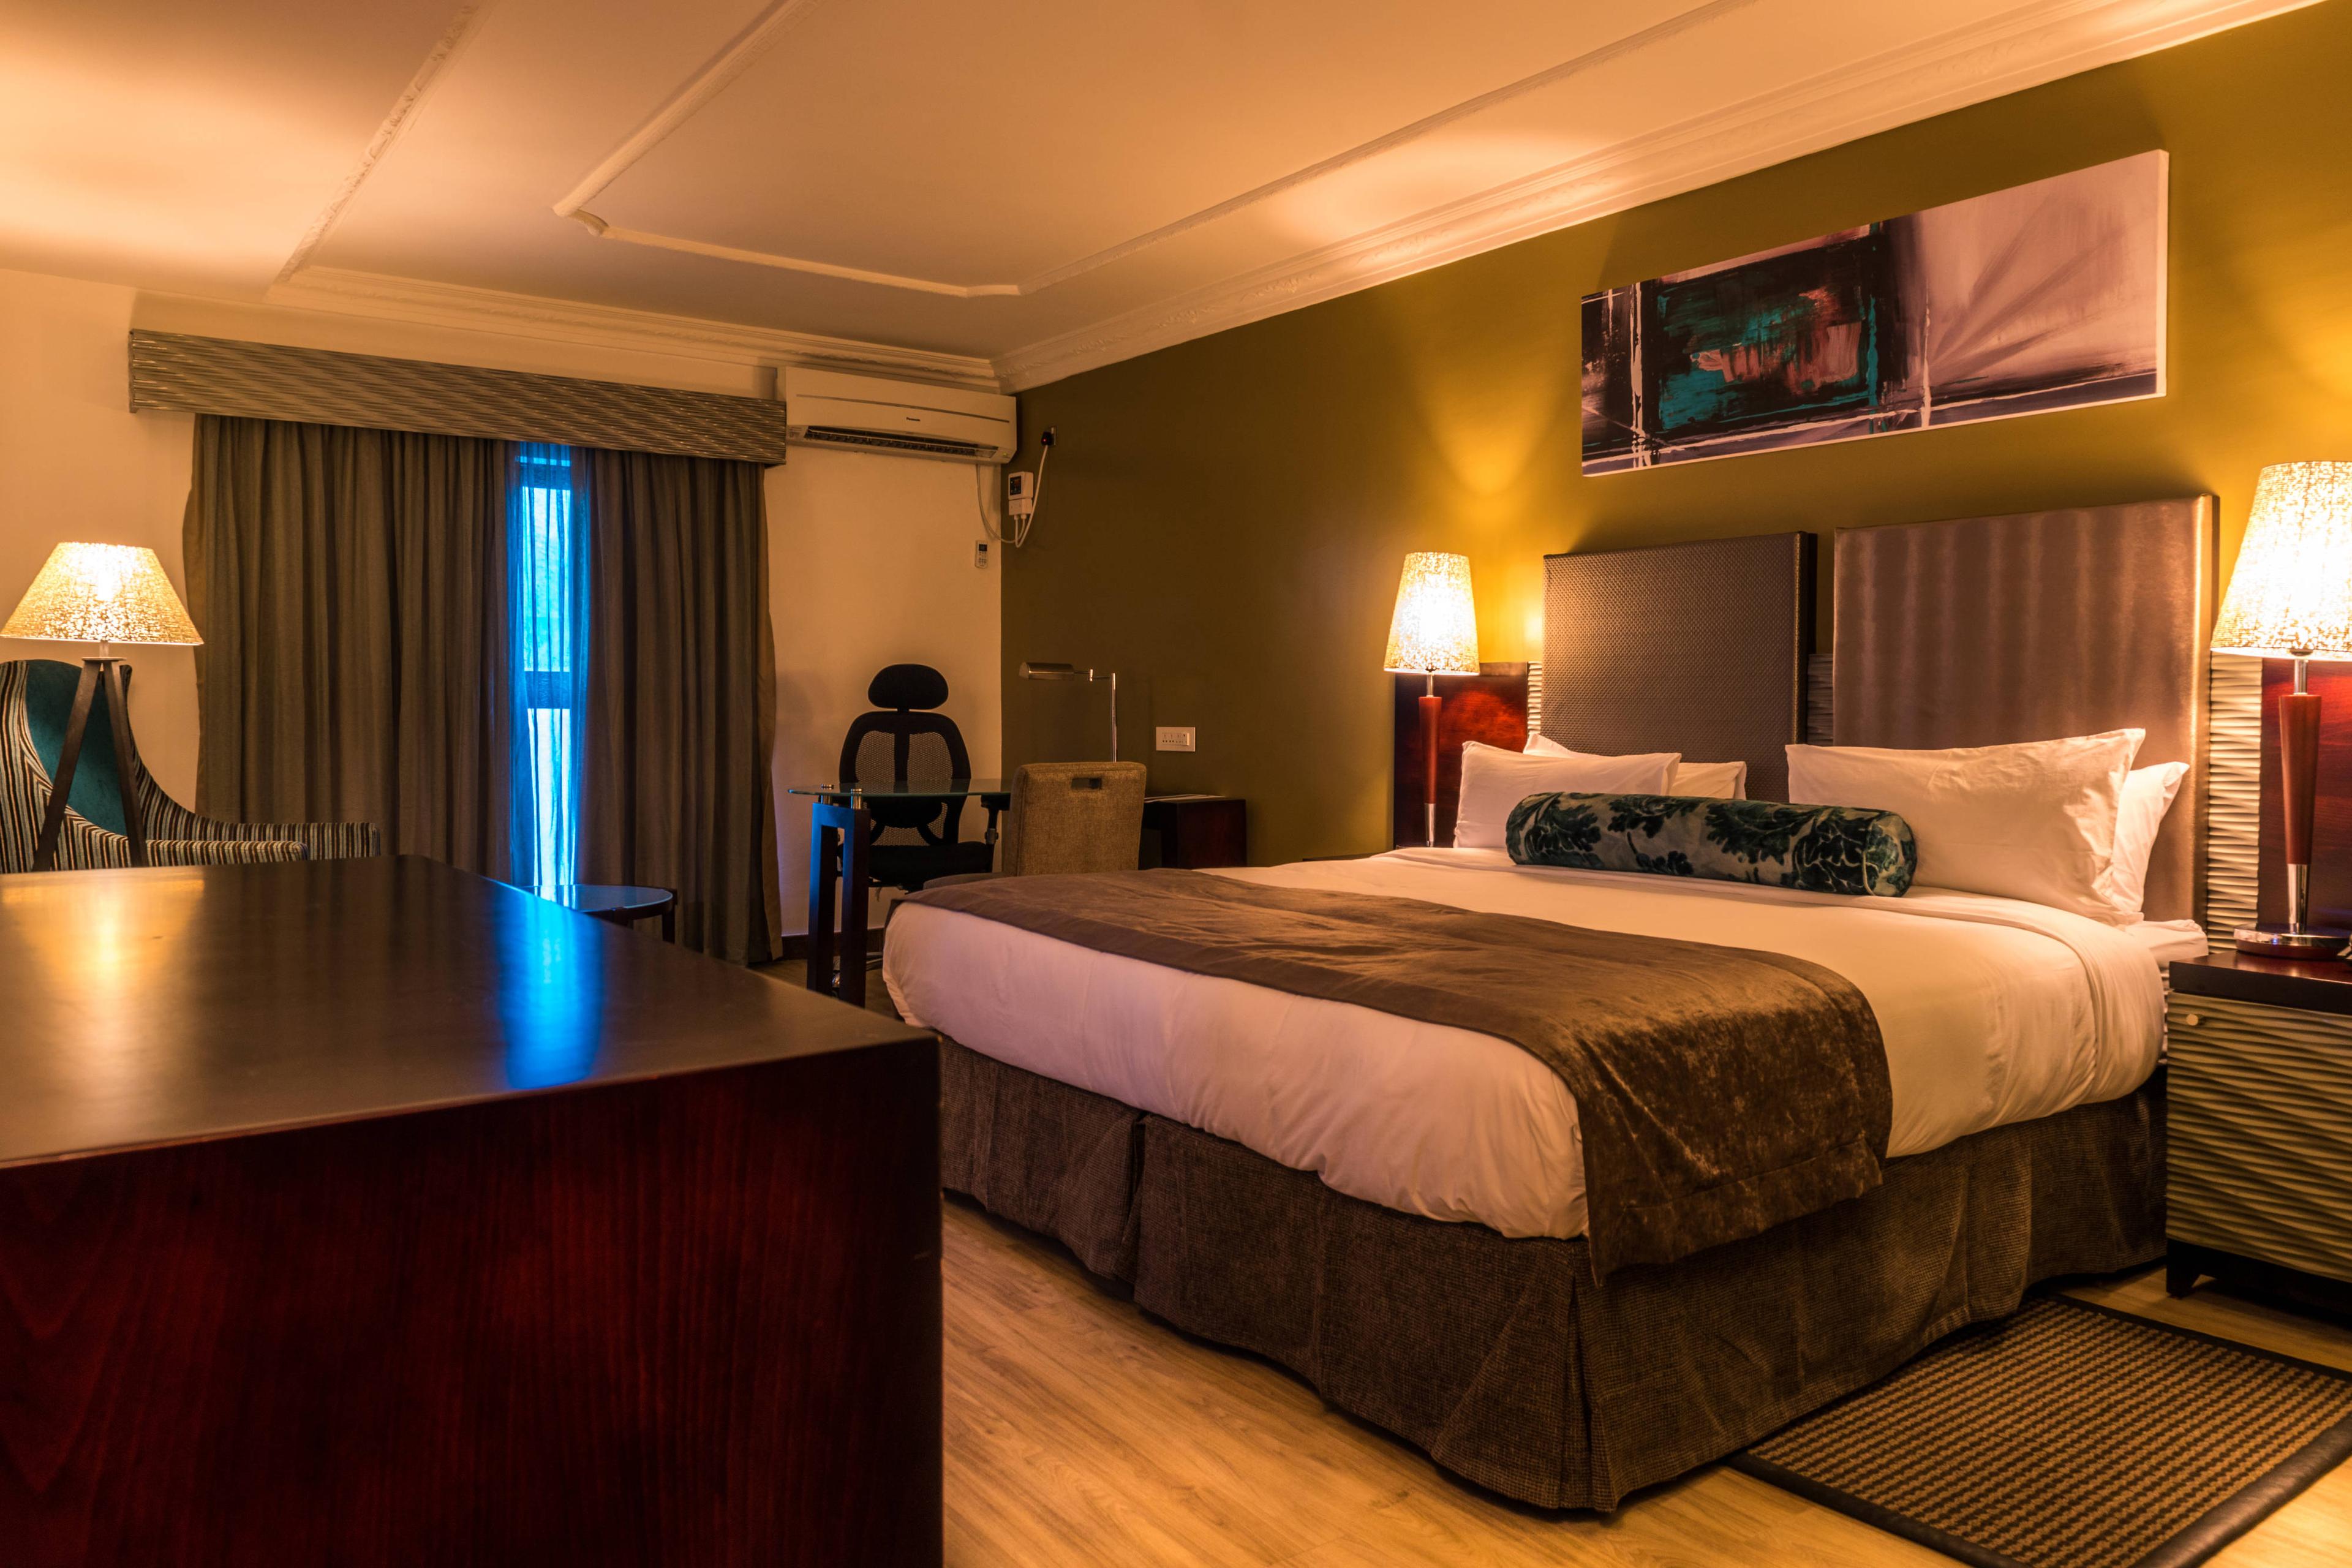 Catch up on some work in the Absolute Superior Guest Room, which comes standard with a work desk and queen size bed.